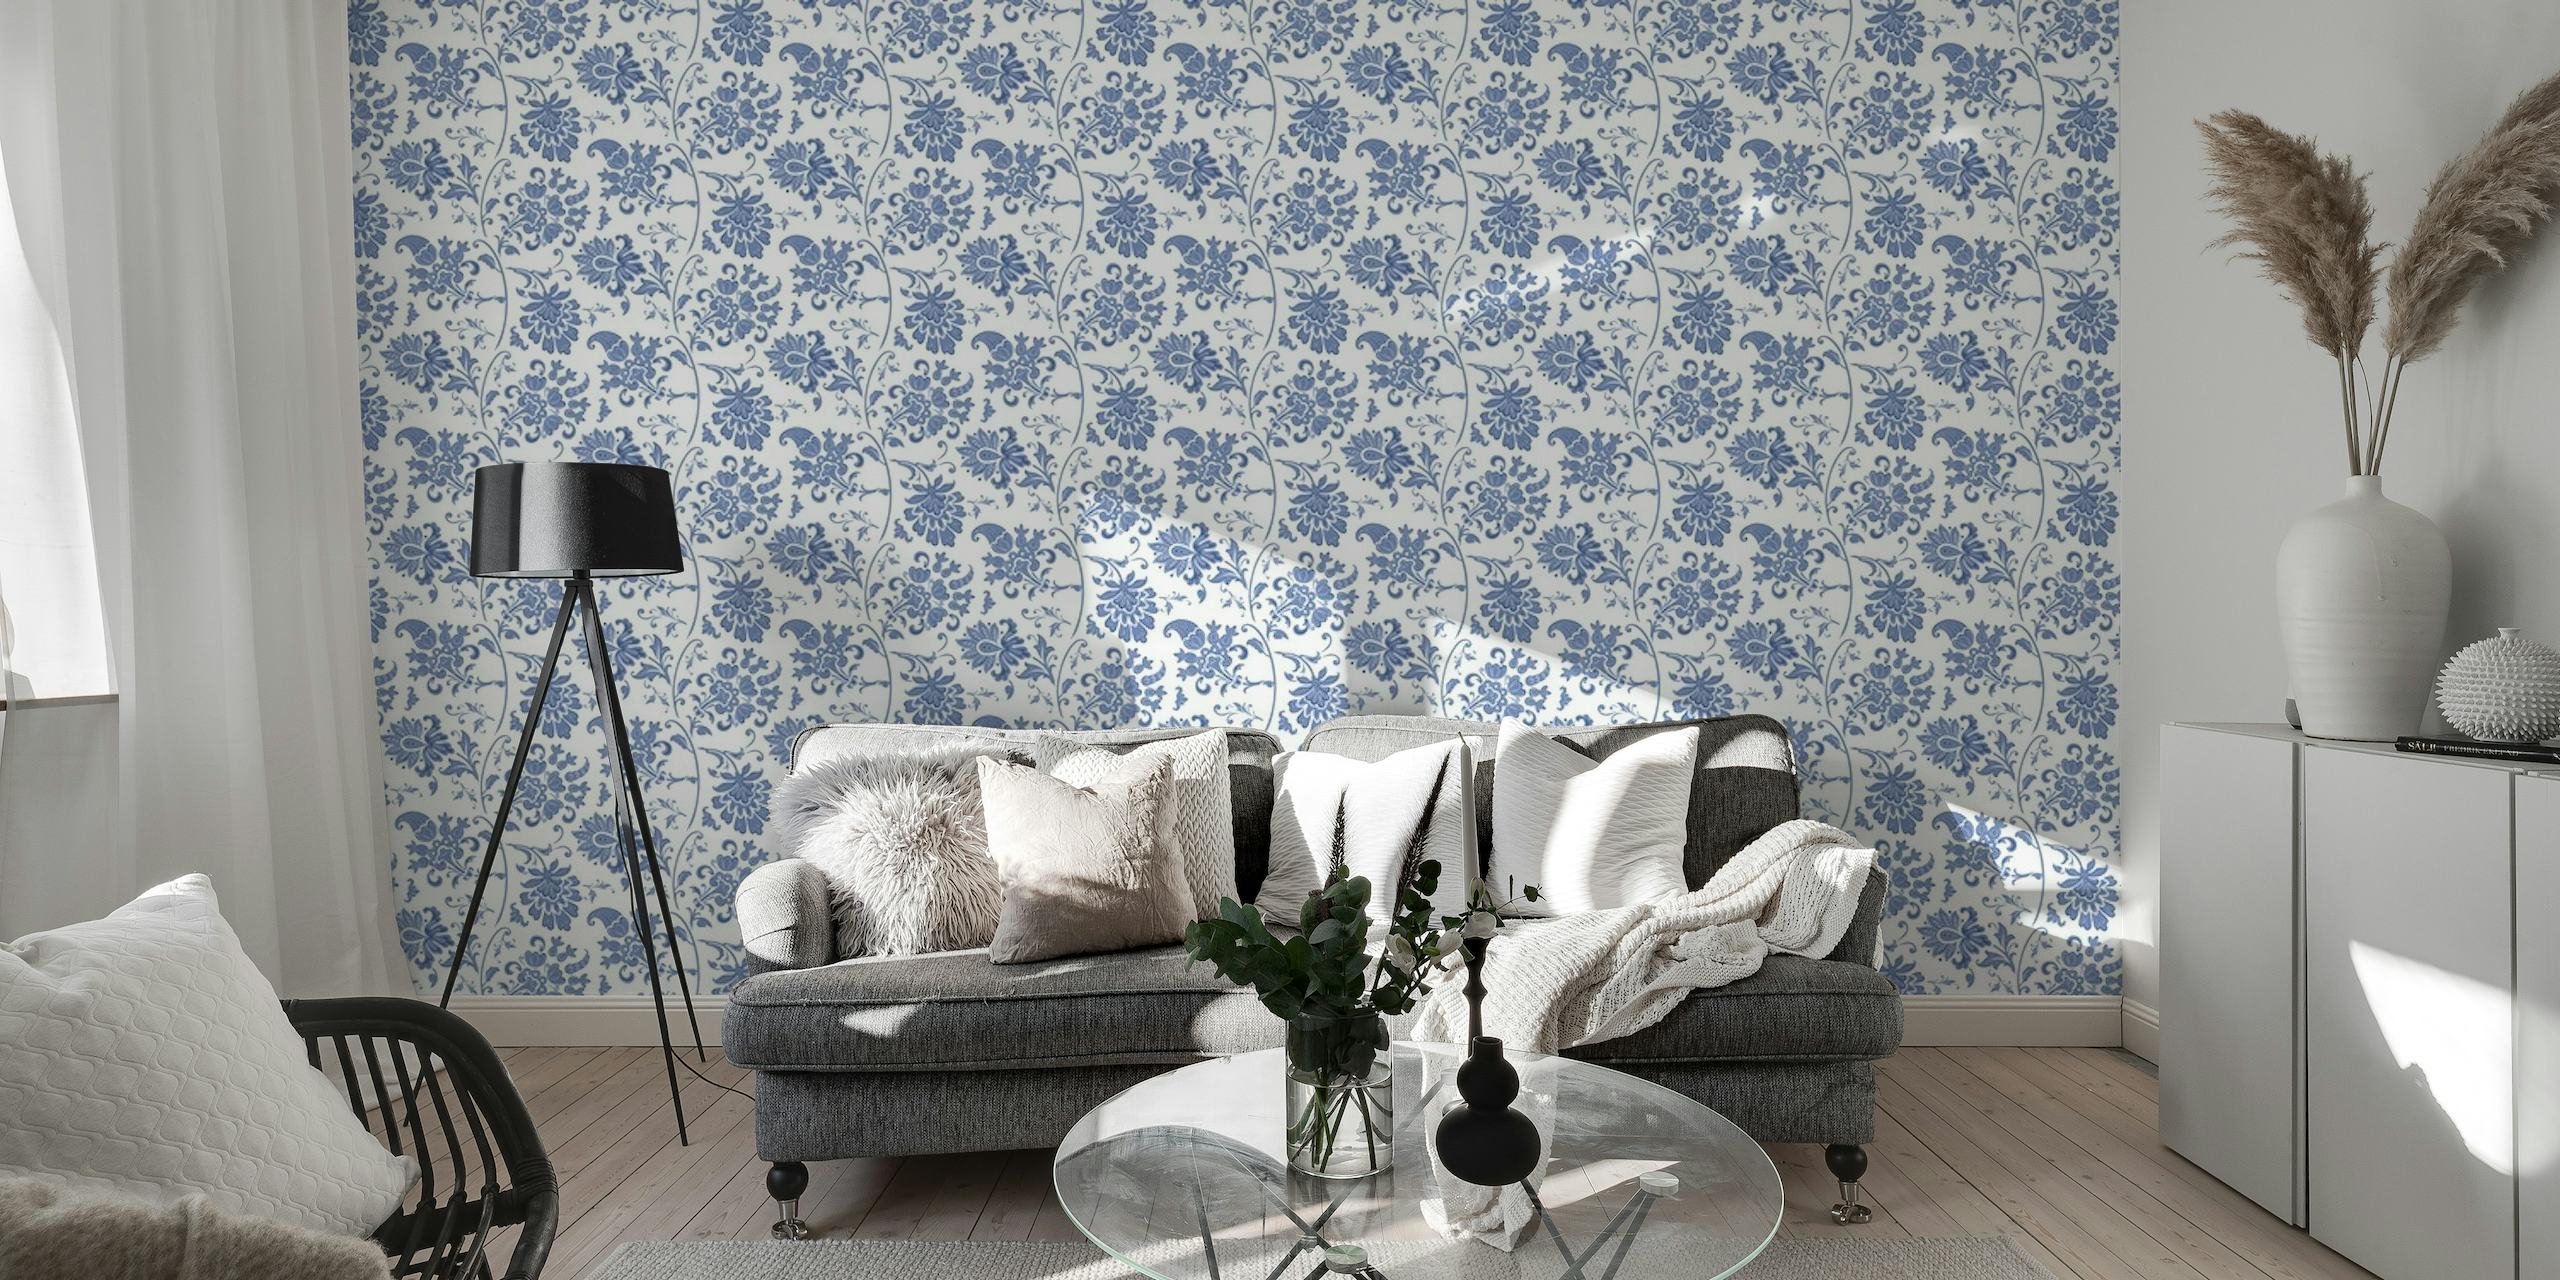 Silene - Floral (Porcelain) wall mural with porcelain blue flowers on white